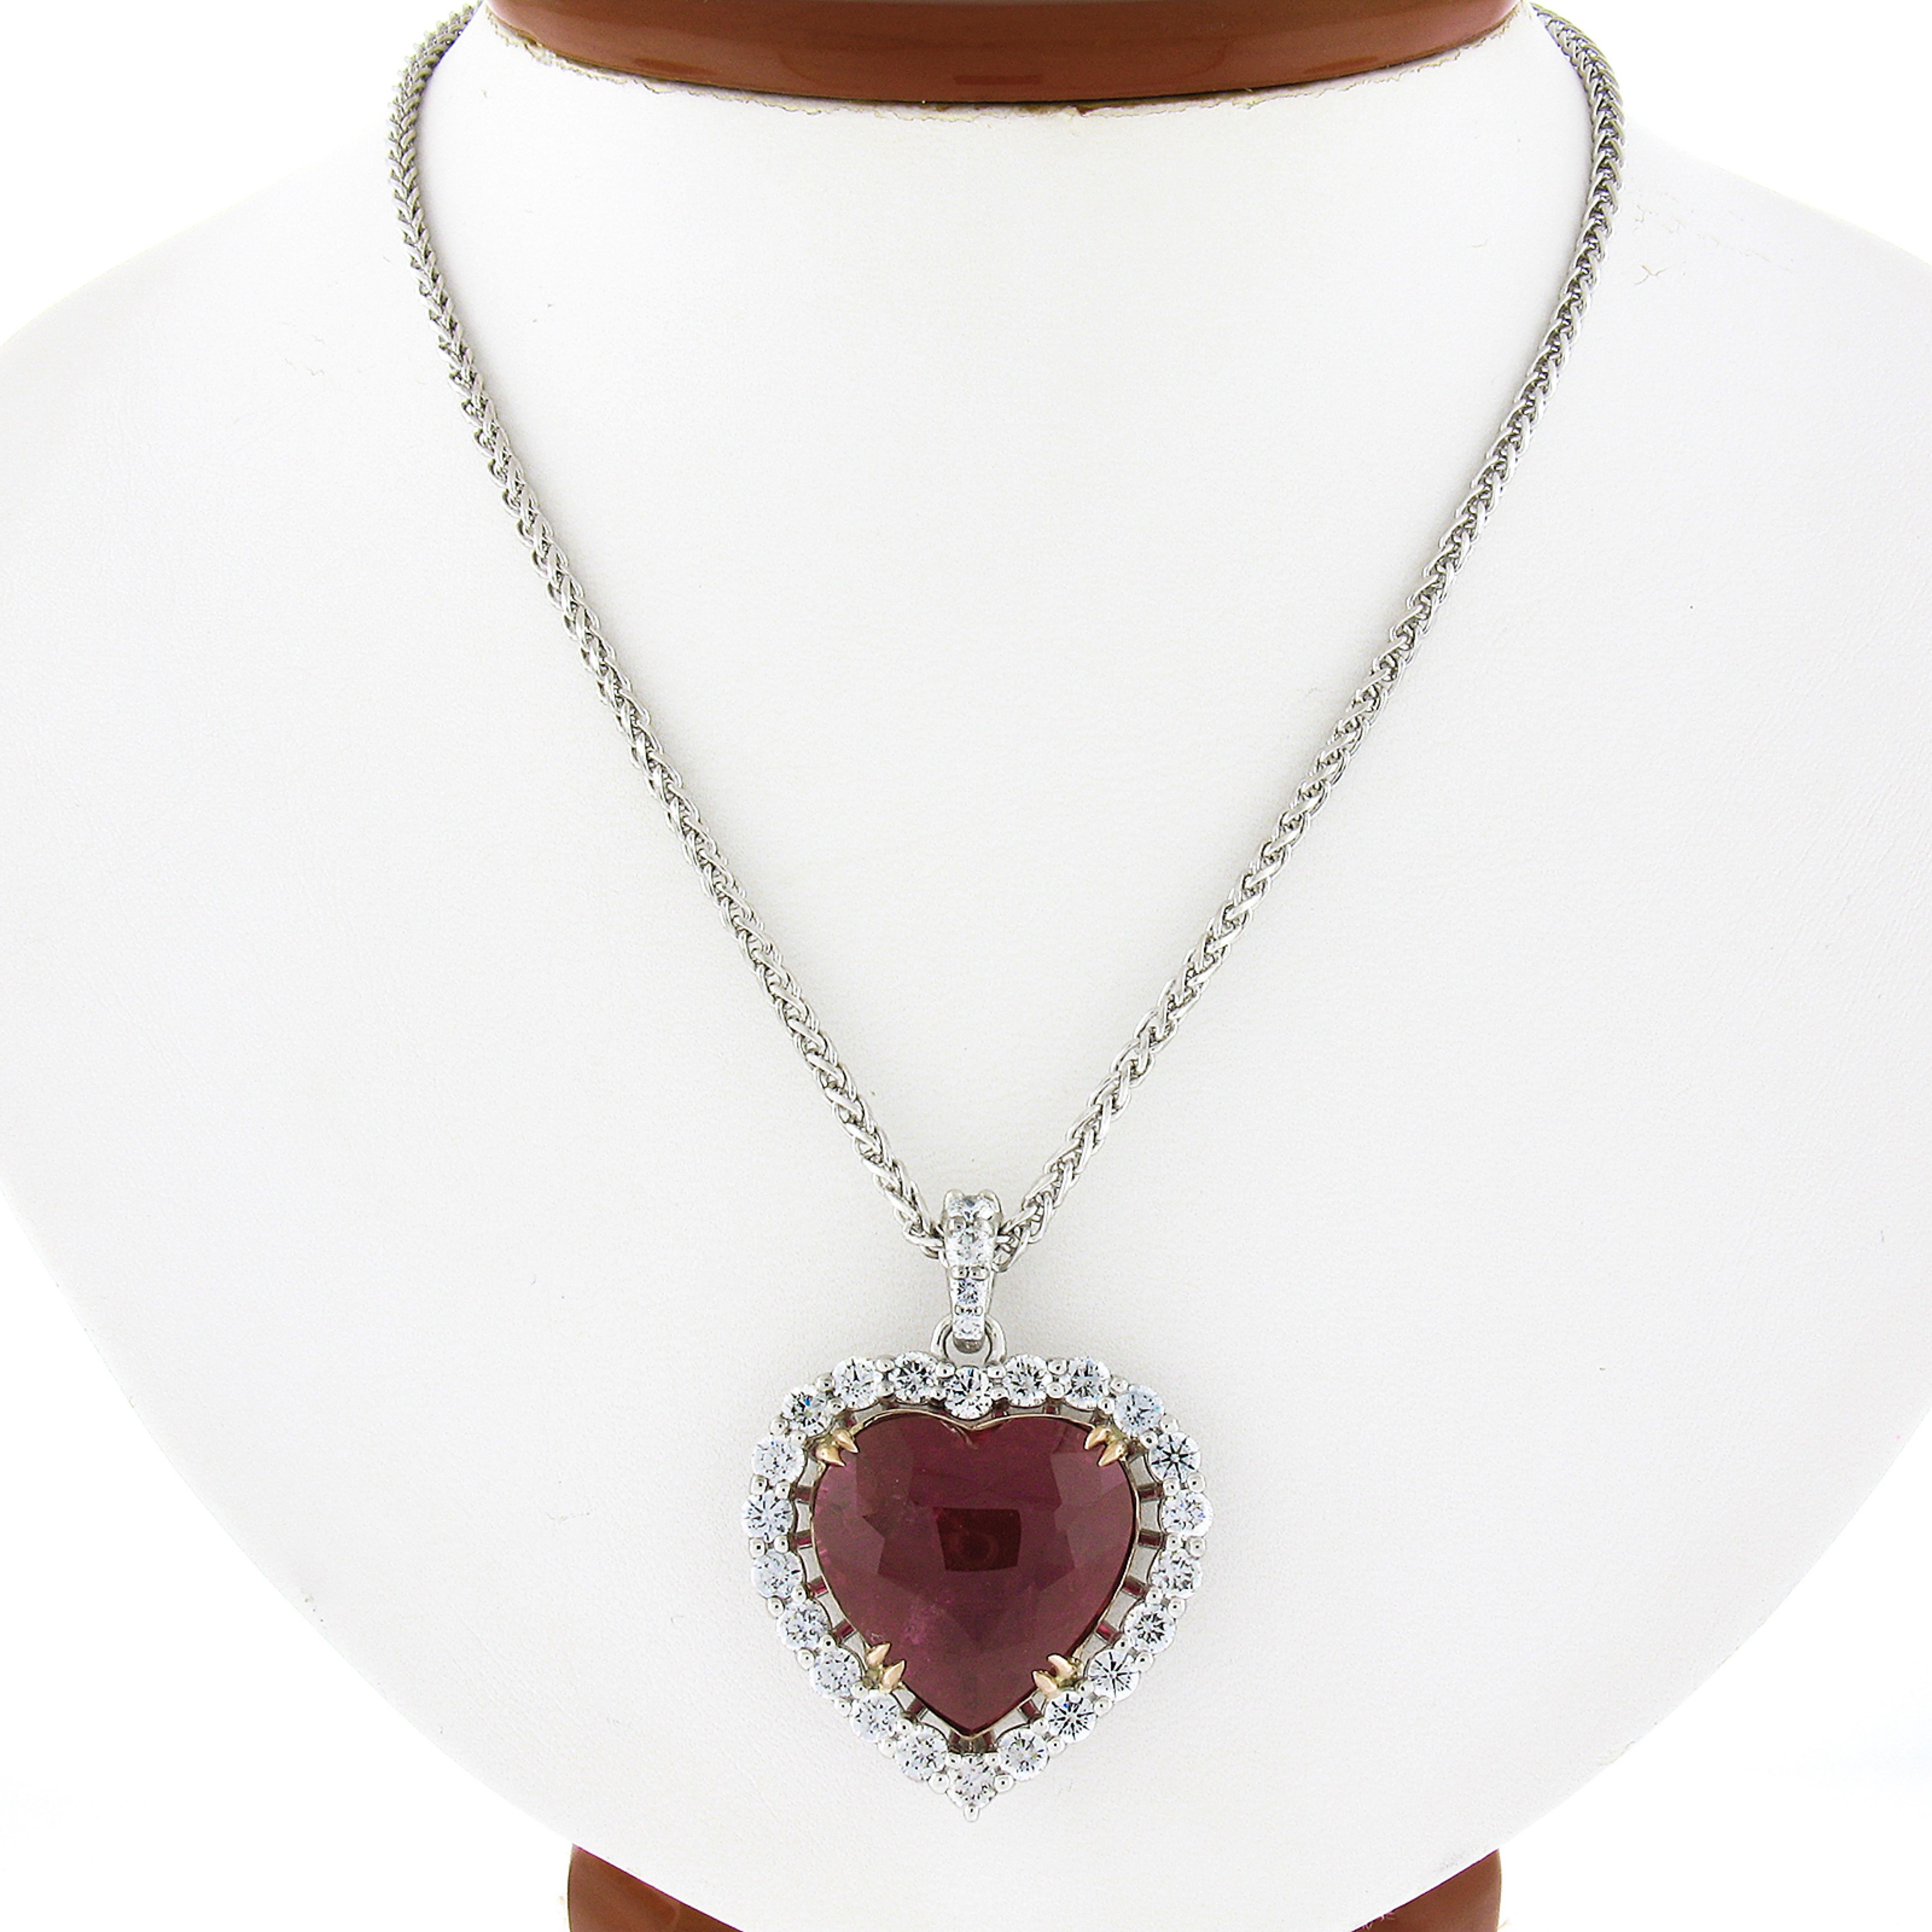 Up for sale is this incredible statement piece, custom designed and newly crafted by Badis Jewelers. The necklace features a large, GIA certified heart shape tourmaline stone that displays the finest and most mesmerizing purplish red color that is